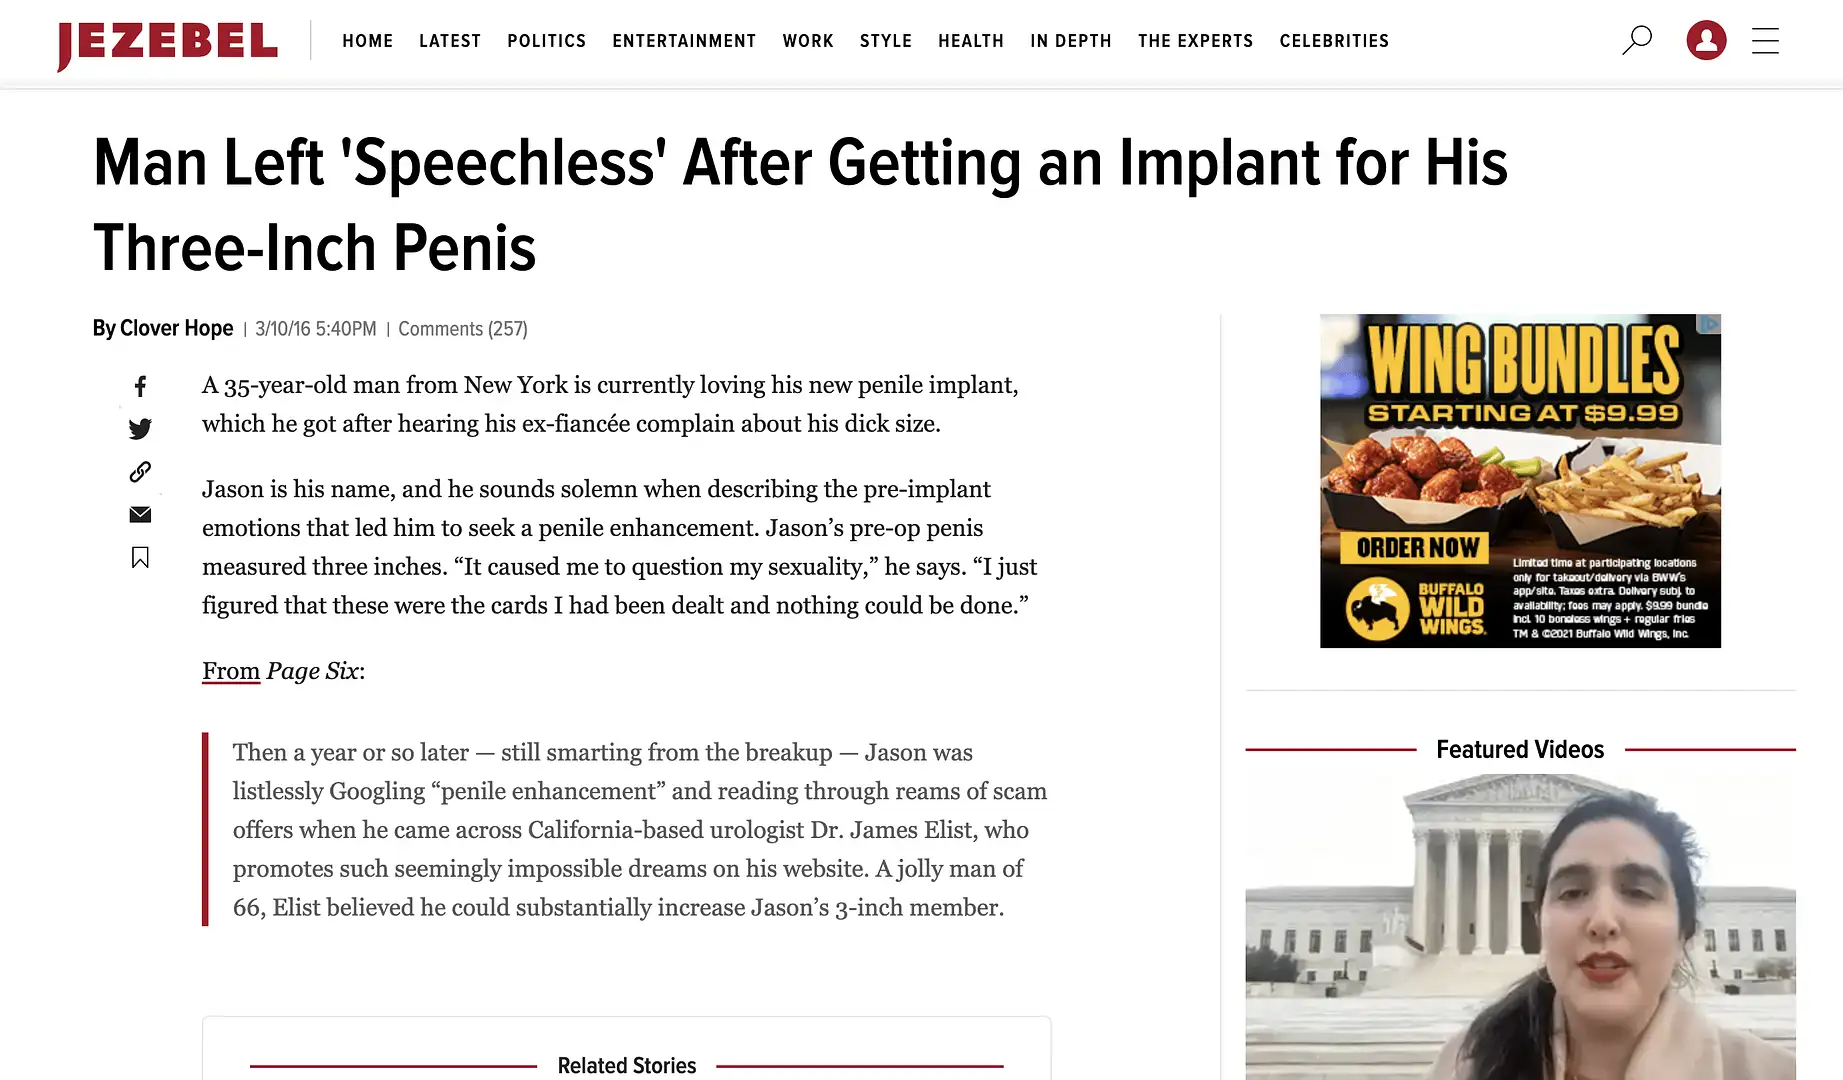 MAN LEFT 'SPEECHLESS' AFTER GETTING AN IMPLANT FOR HIS THREE-INCH PENIS